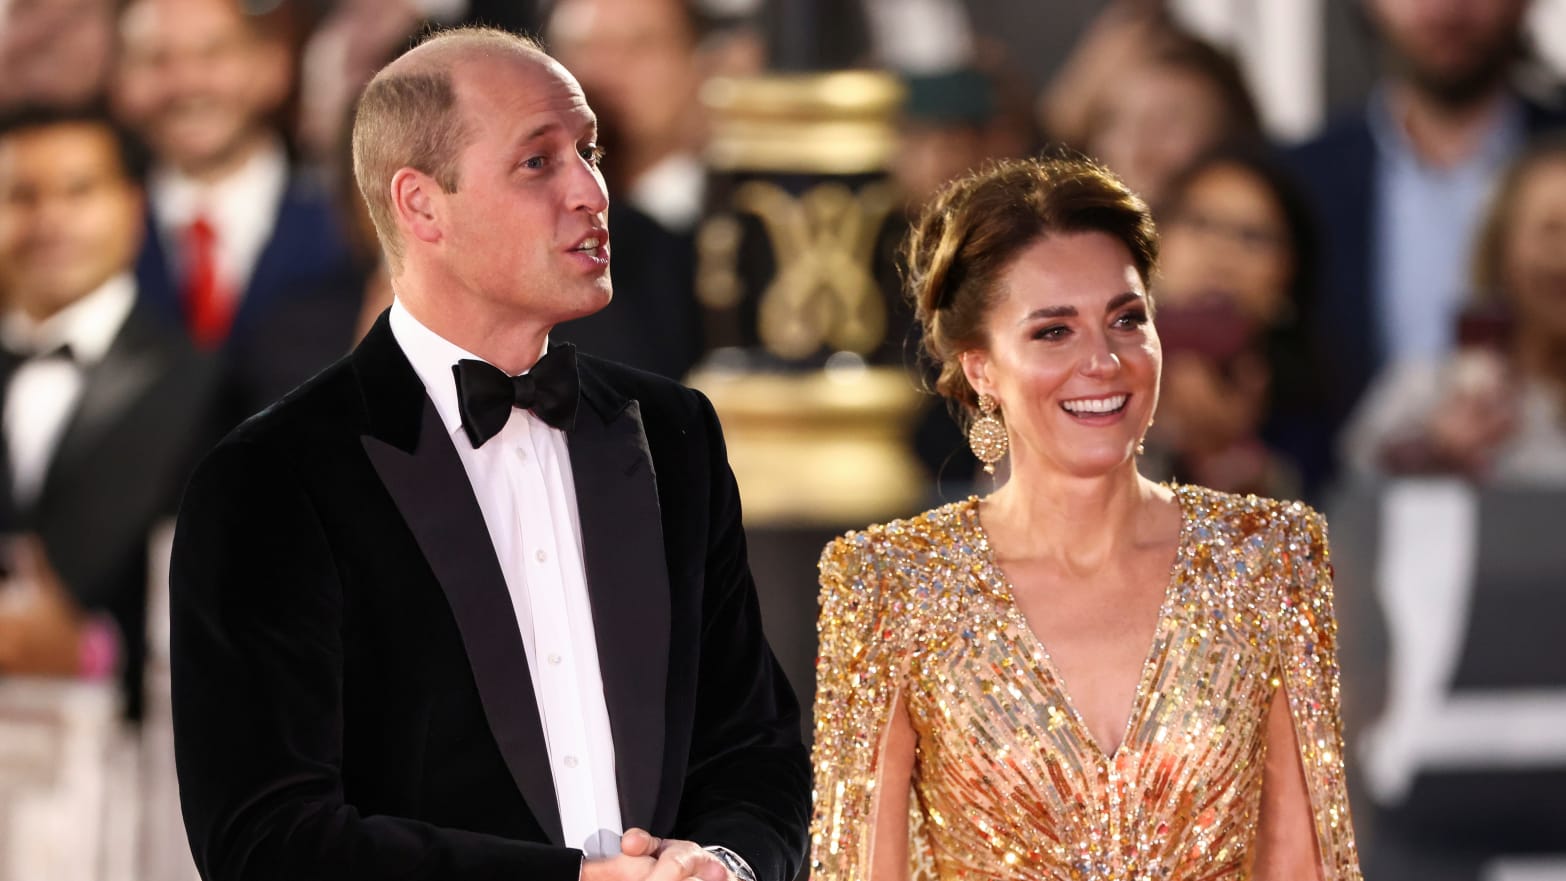 Britain's Prince William and Catherine, Duchess of Cambridge, arrive at the world premiere of the new James Bond film "No Time To Die" at the Royal Albert Hall in London, Britain, September 28, 2021.